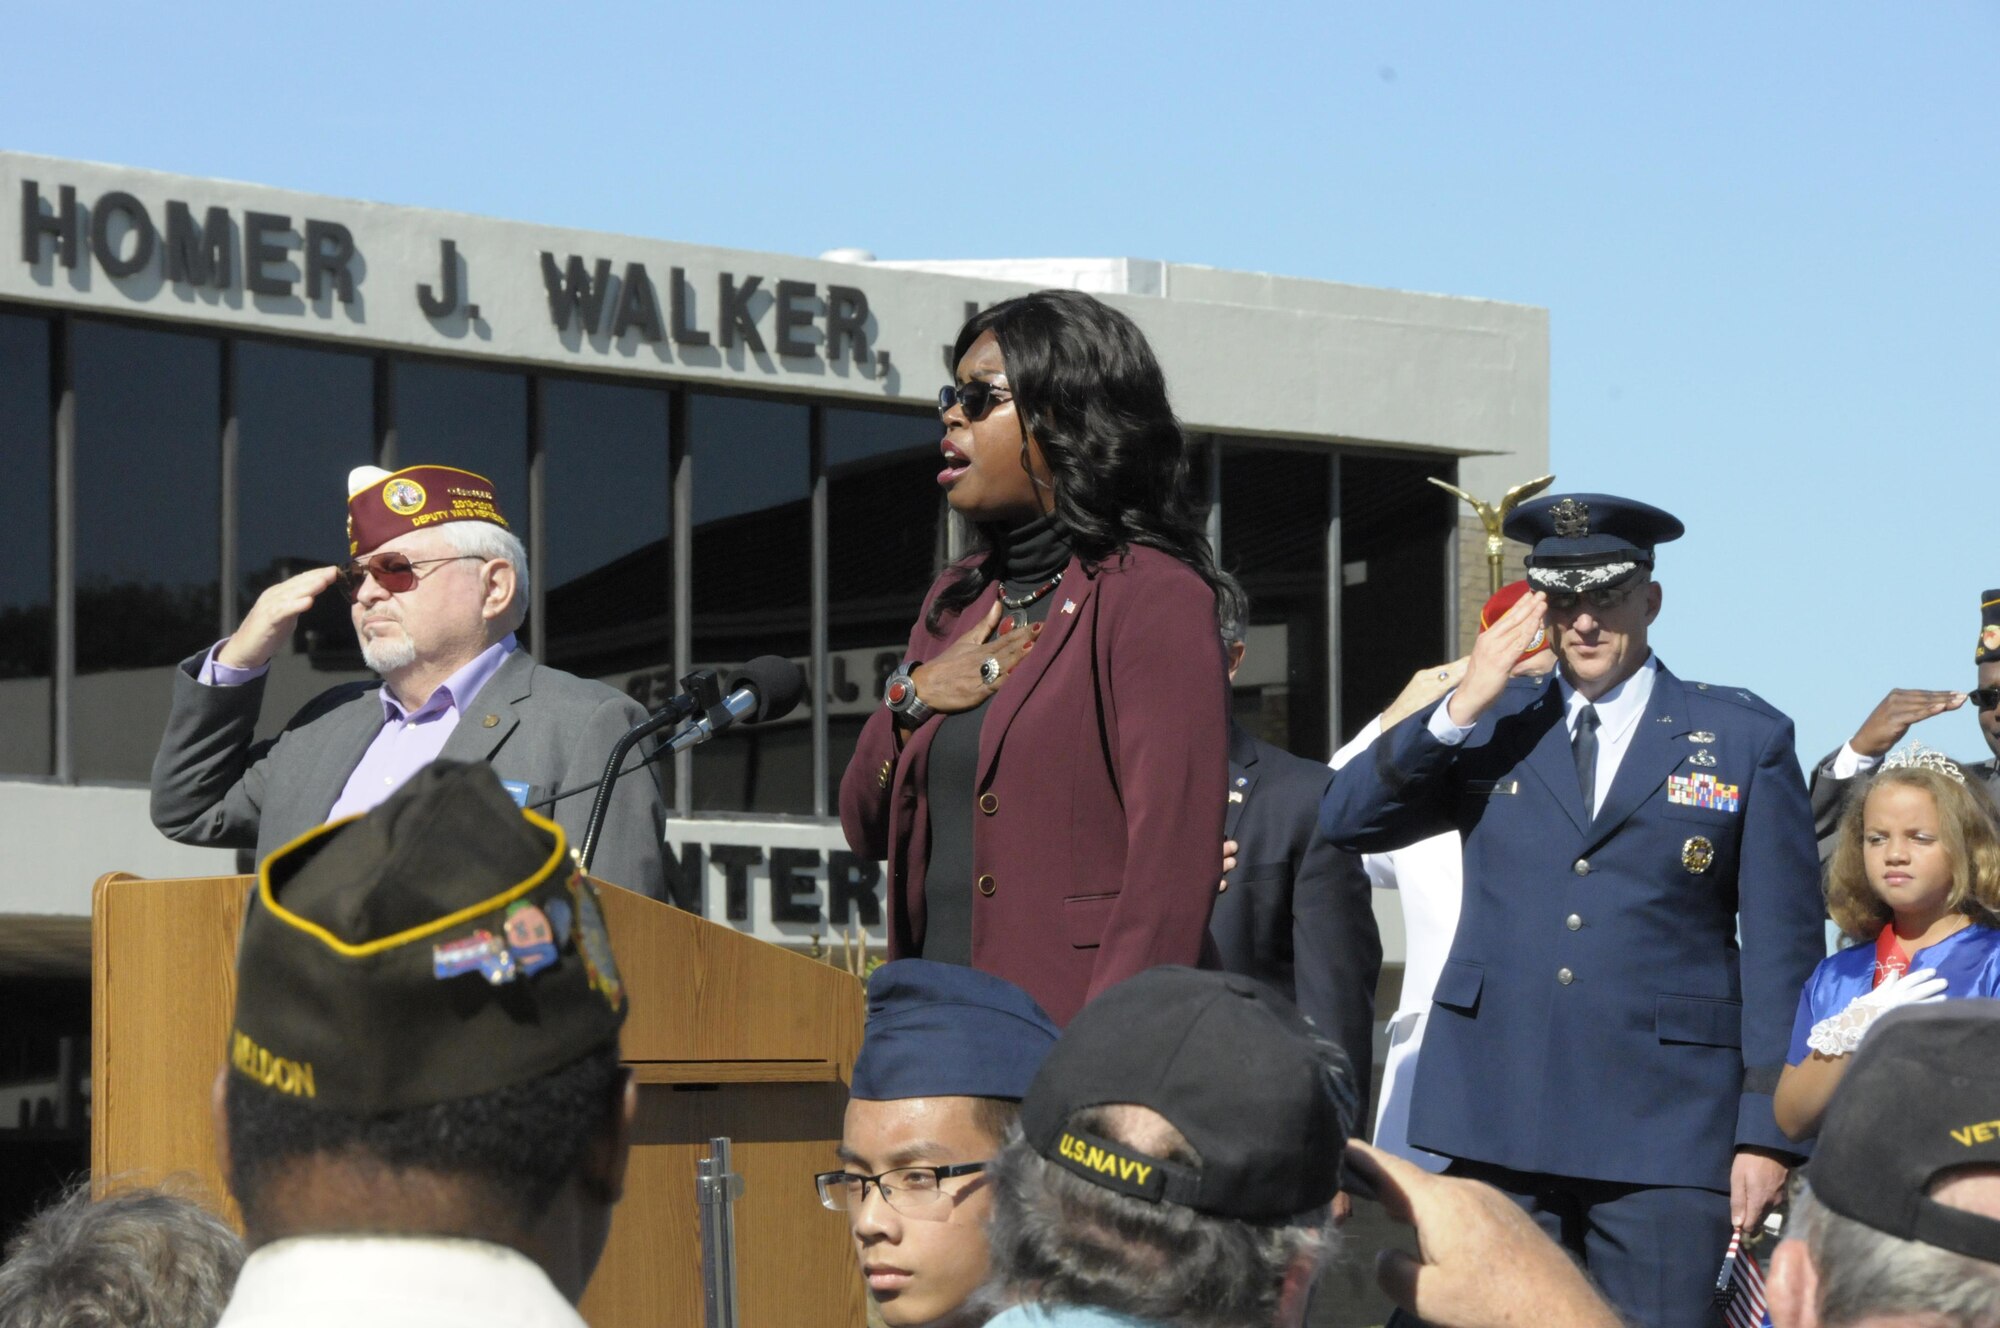 Diana Vining sings the National Anthem during the Warner Robins Veteran’s Day observance at City Hall Nov. 11. Brig. Gen. John Hickok, right, deputy director of Logistics, Engineering and Force Protection at Headquarters, Air Force Reserve Command, attended on behalf of the command. (U.S. Air Force photo/Robert Helton)